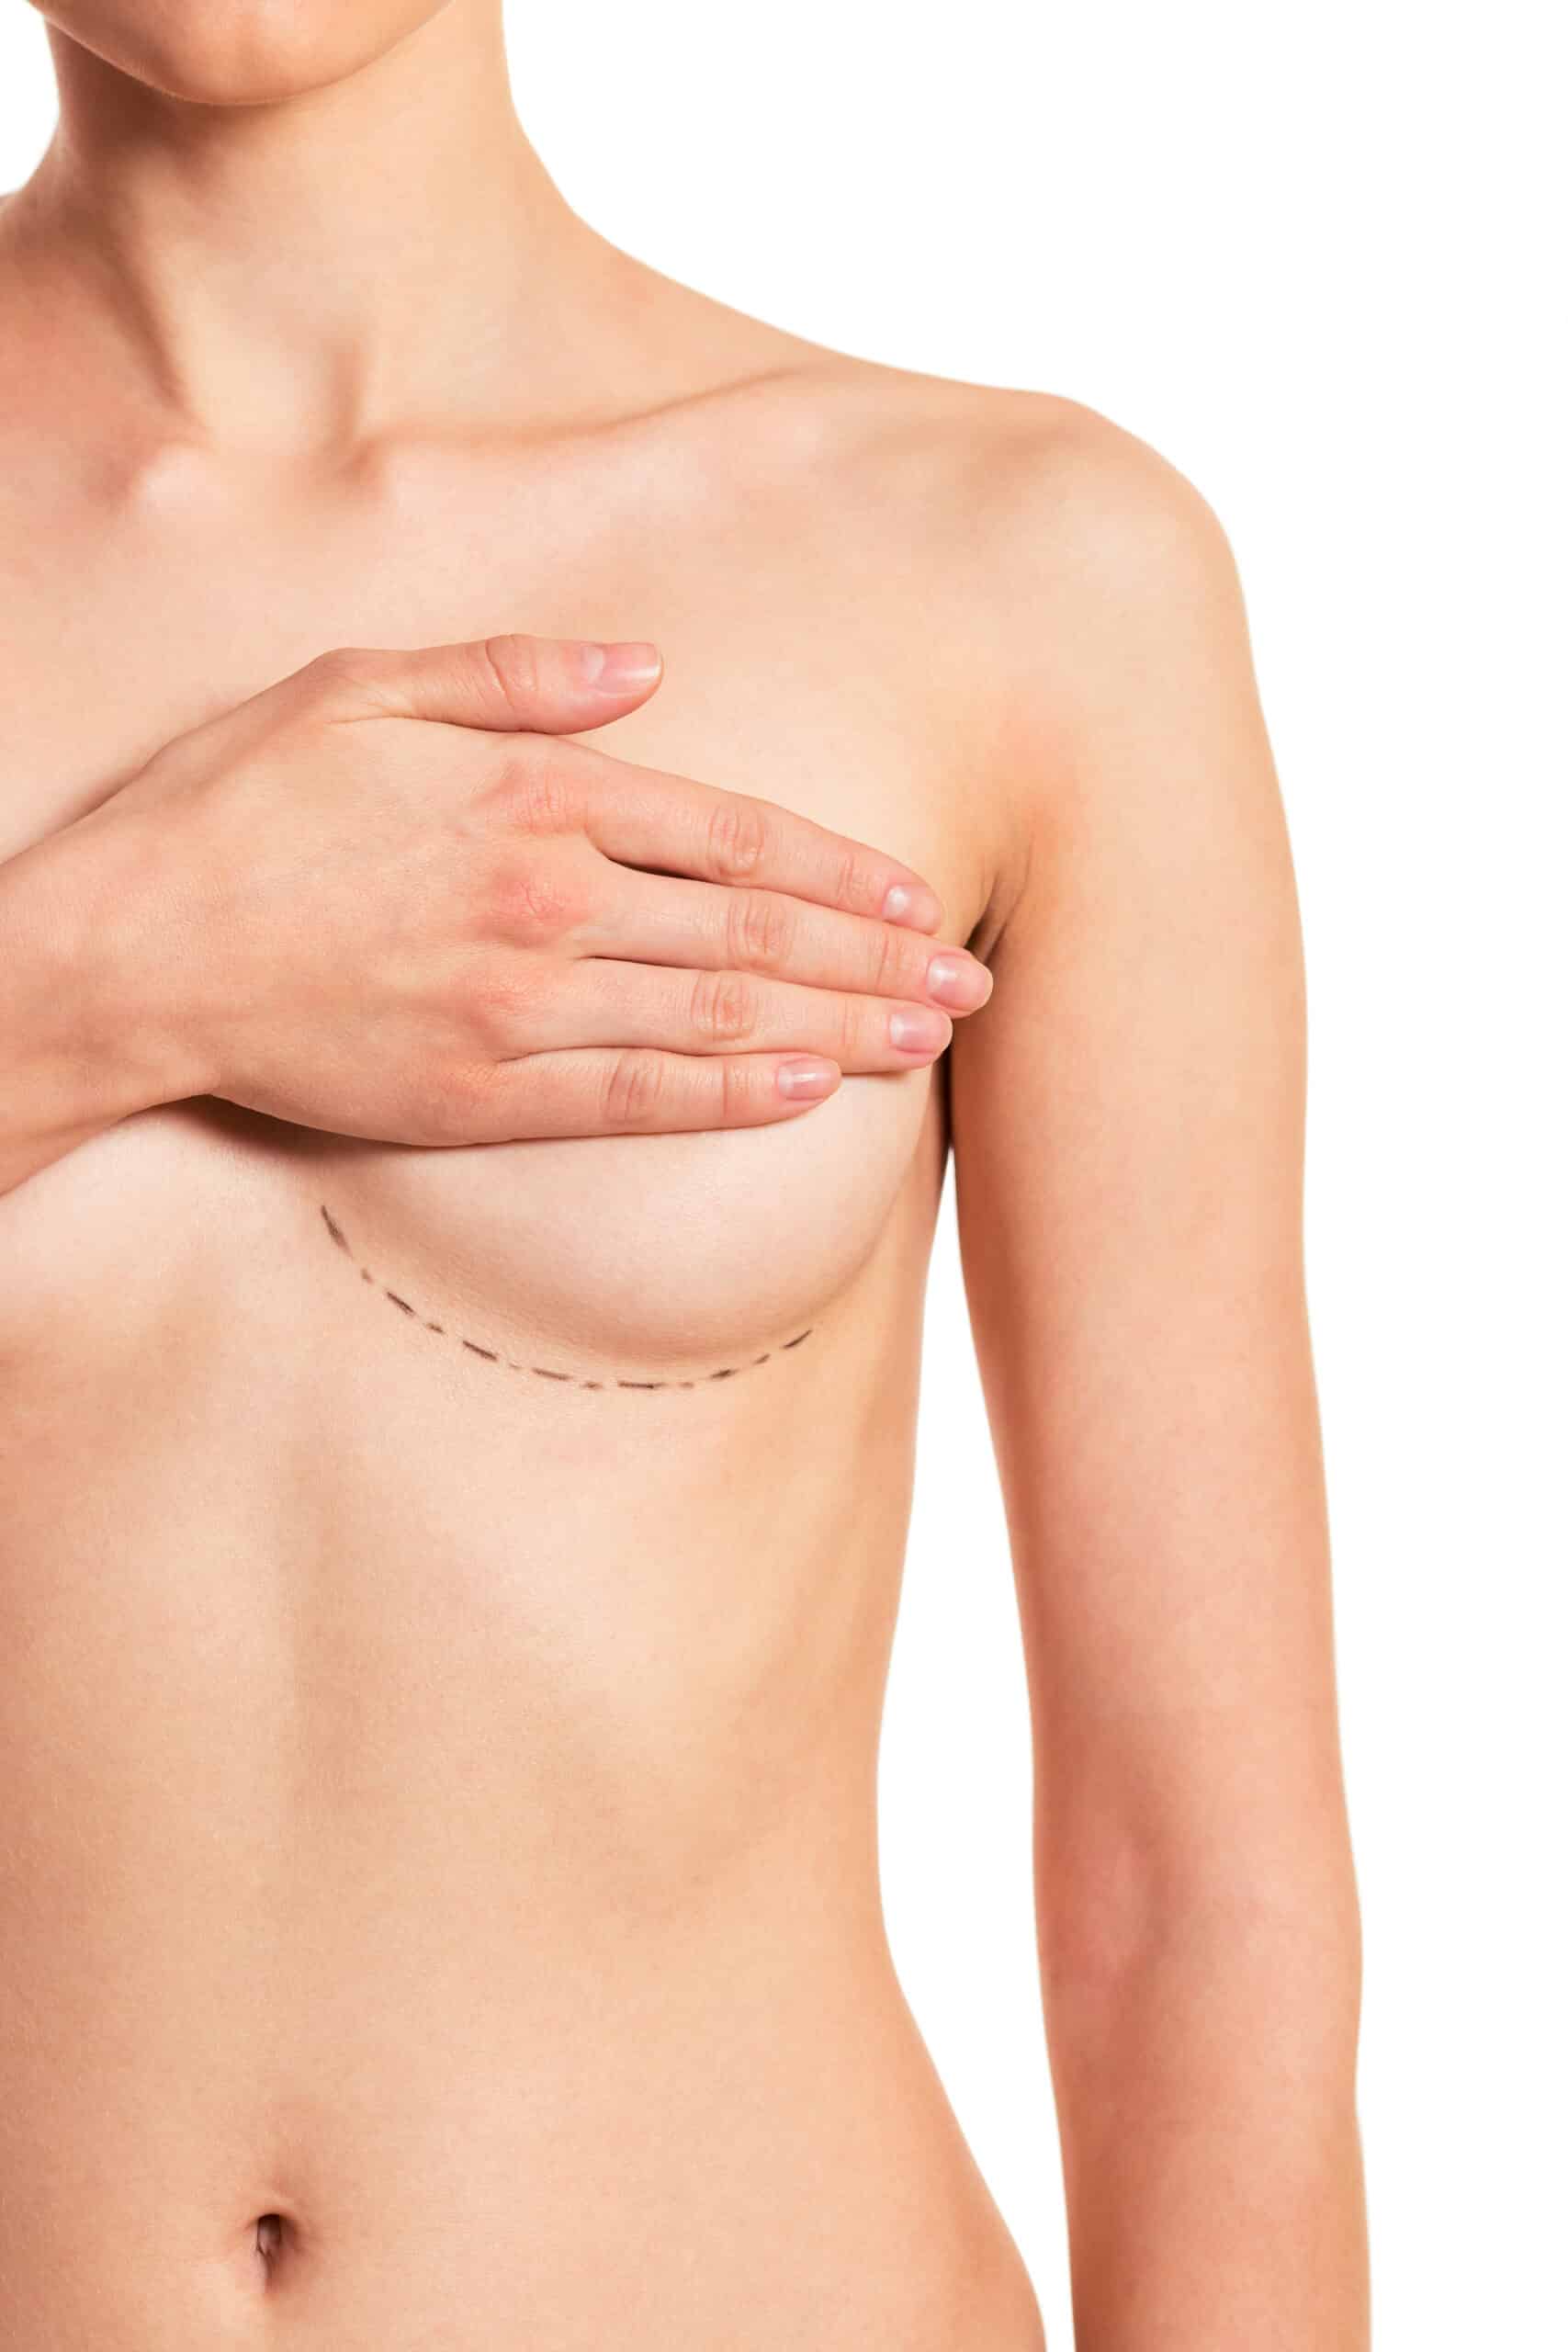 Preparation for breast surgery